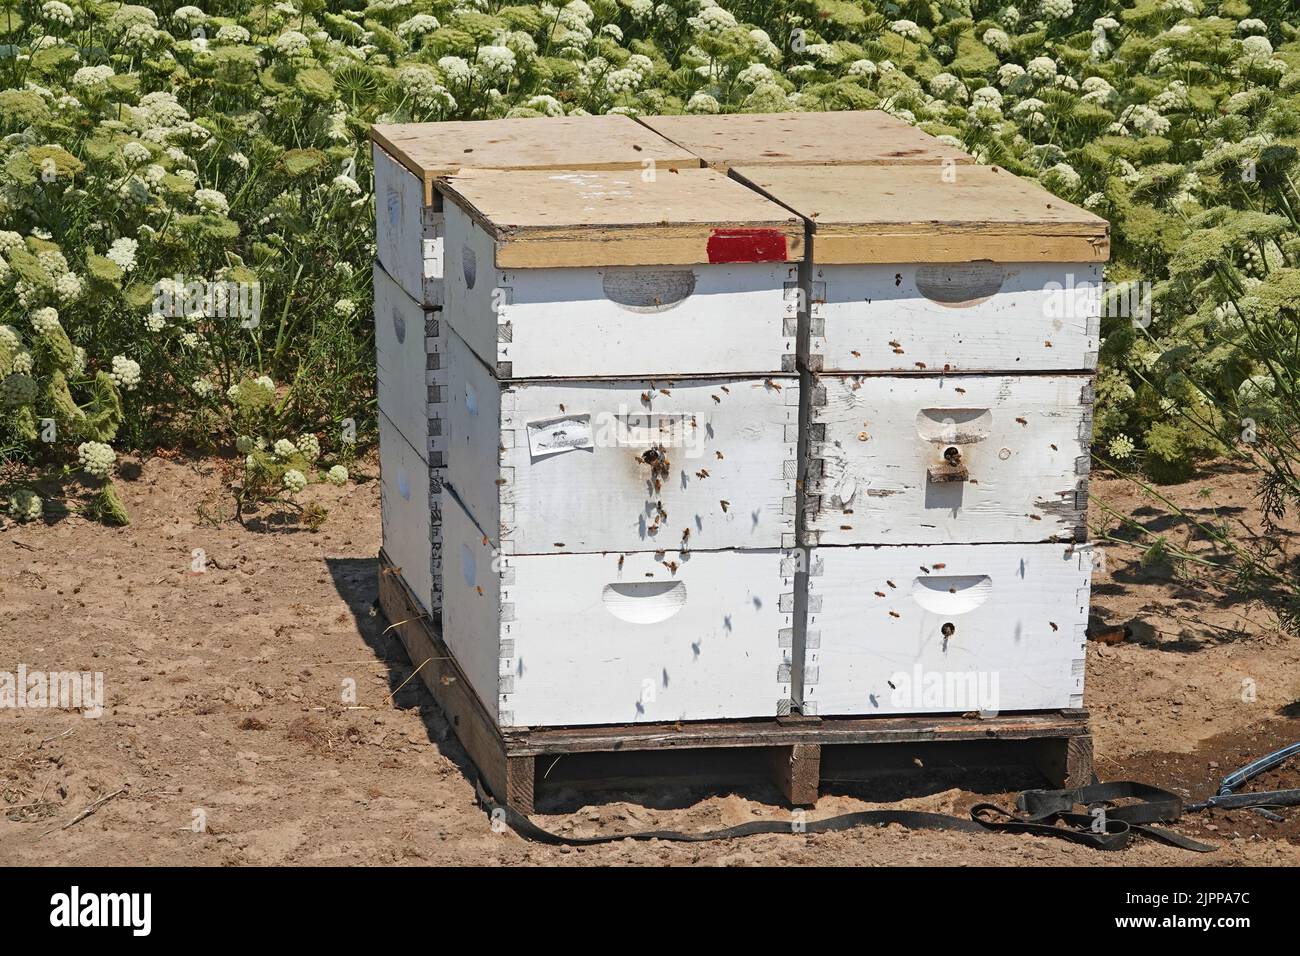 An active bee hive with european honey bees near a large field of carrot seed, being grown near the small town of Culver, Oregon. Carrot seed is used in animal feed. Stock Photo